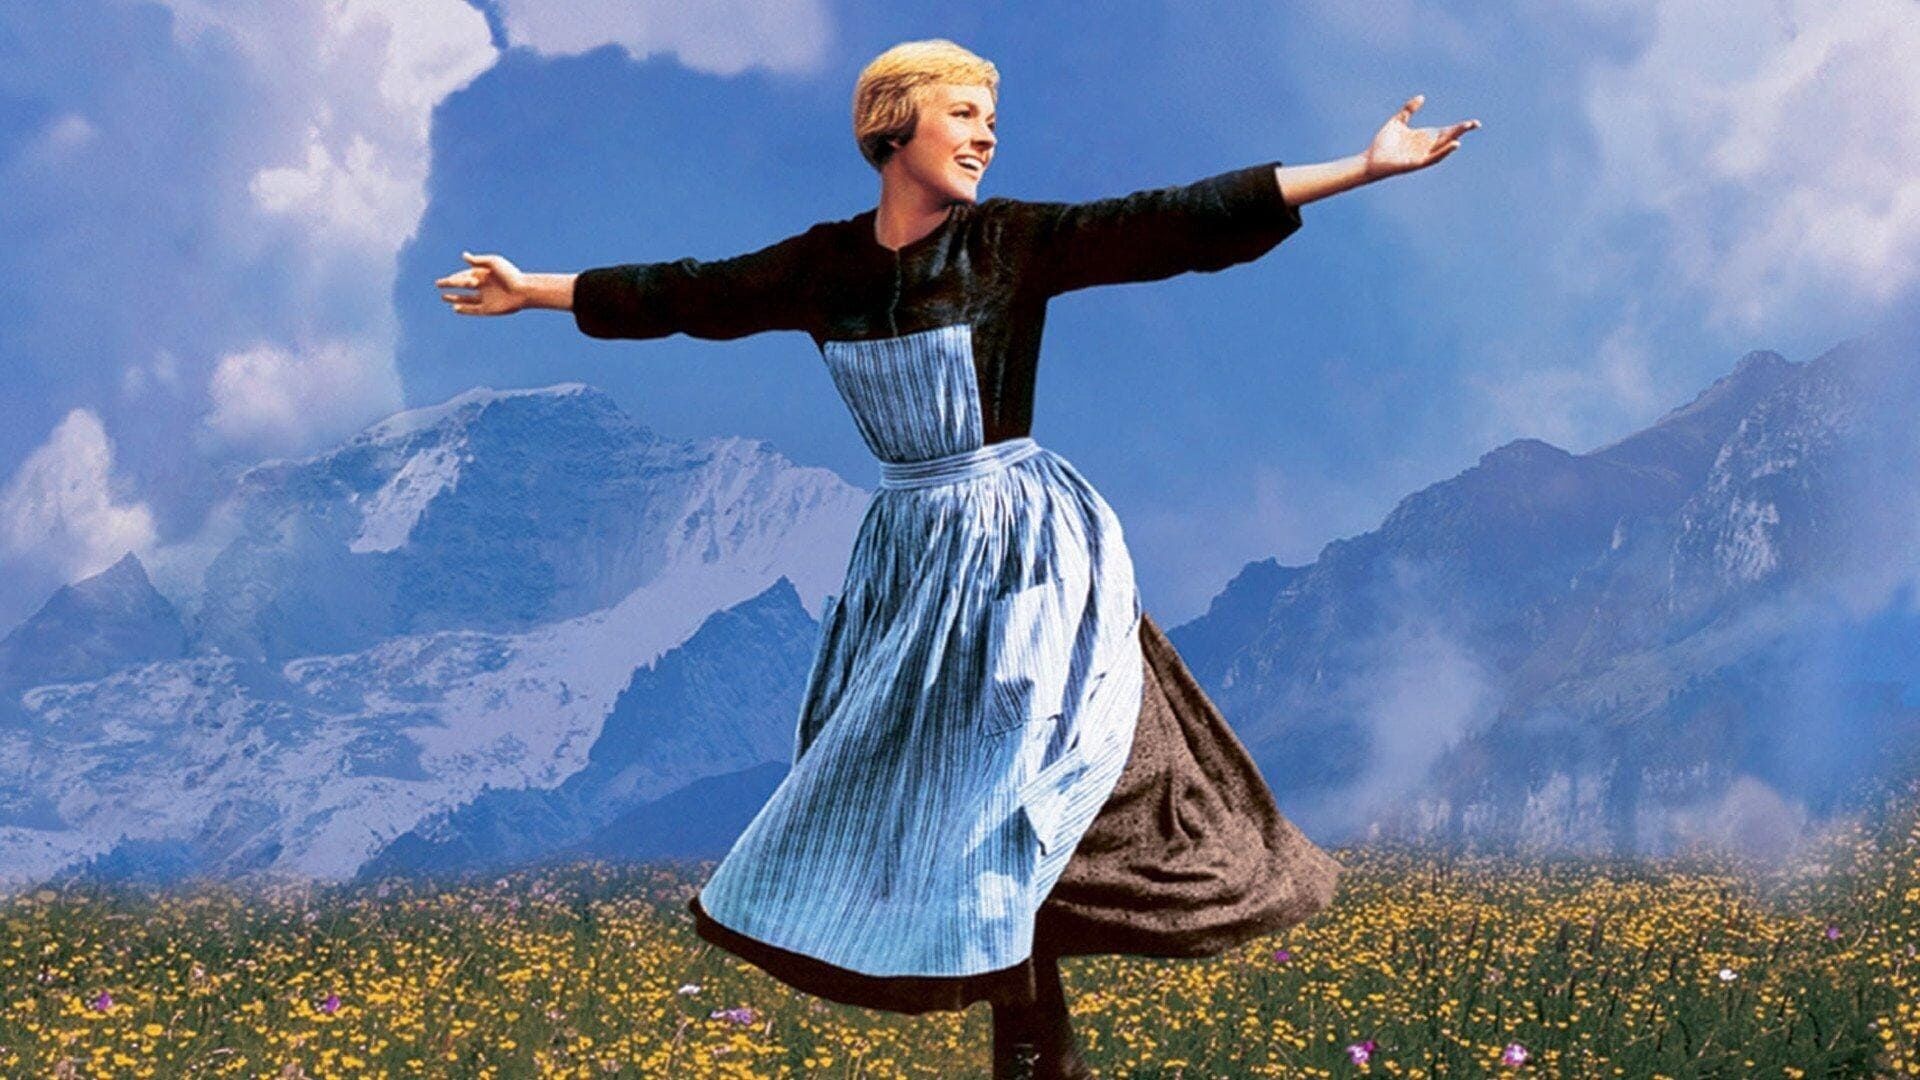 Sound of Music 1965, Backdrops, Movie database, Classic musical, 1920x1080 Full HD Desktop